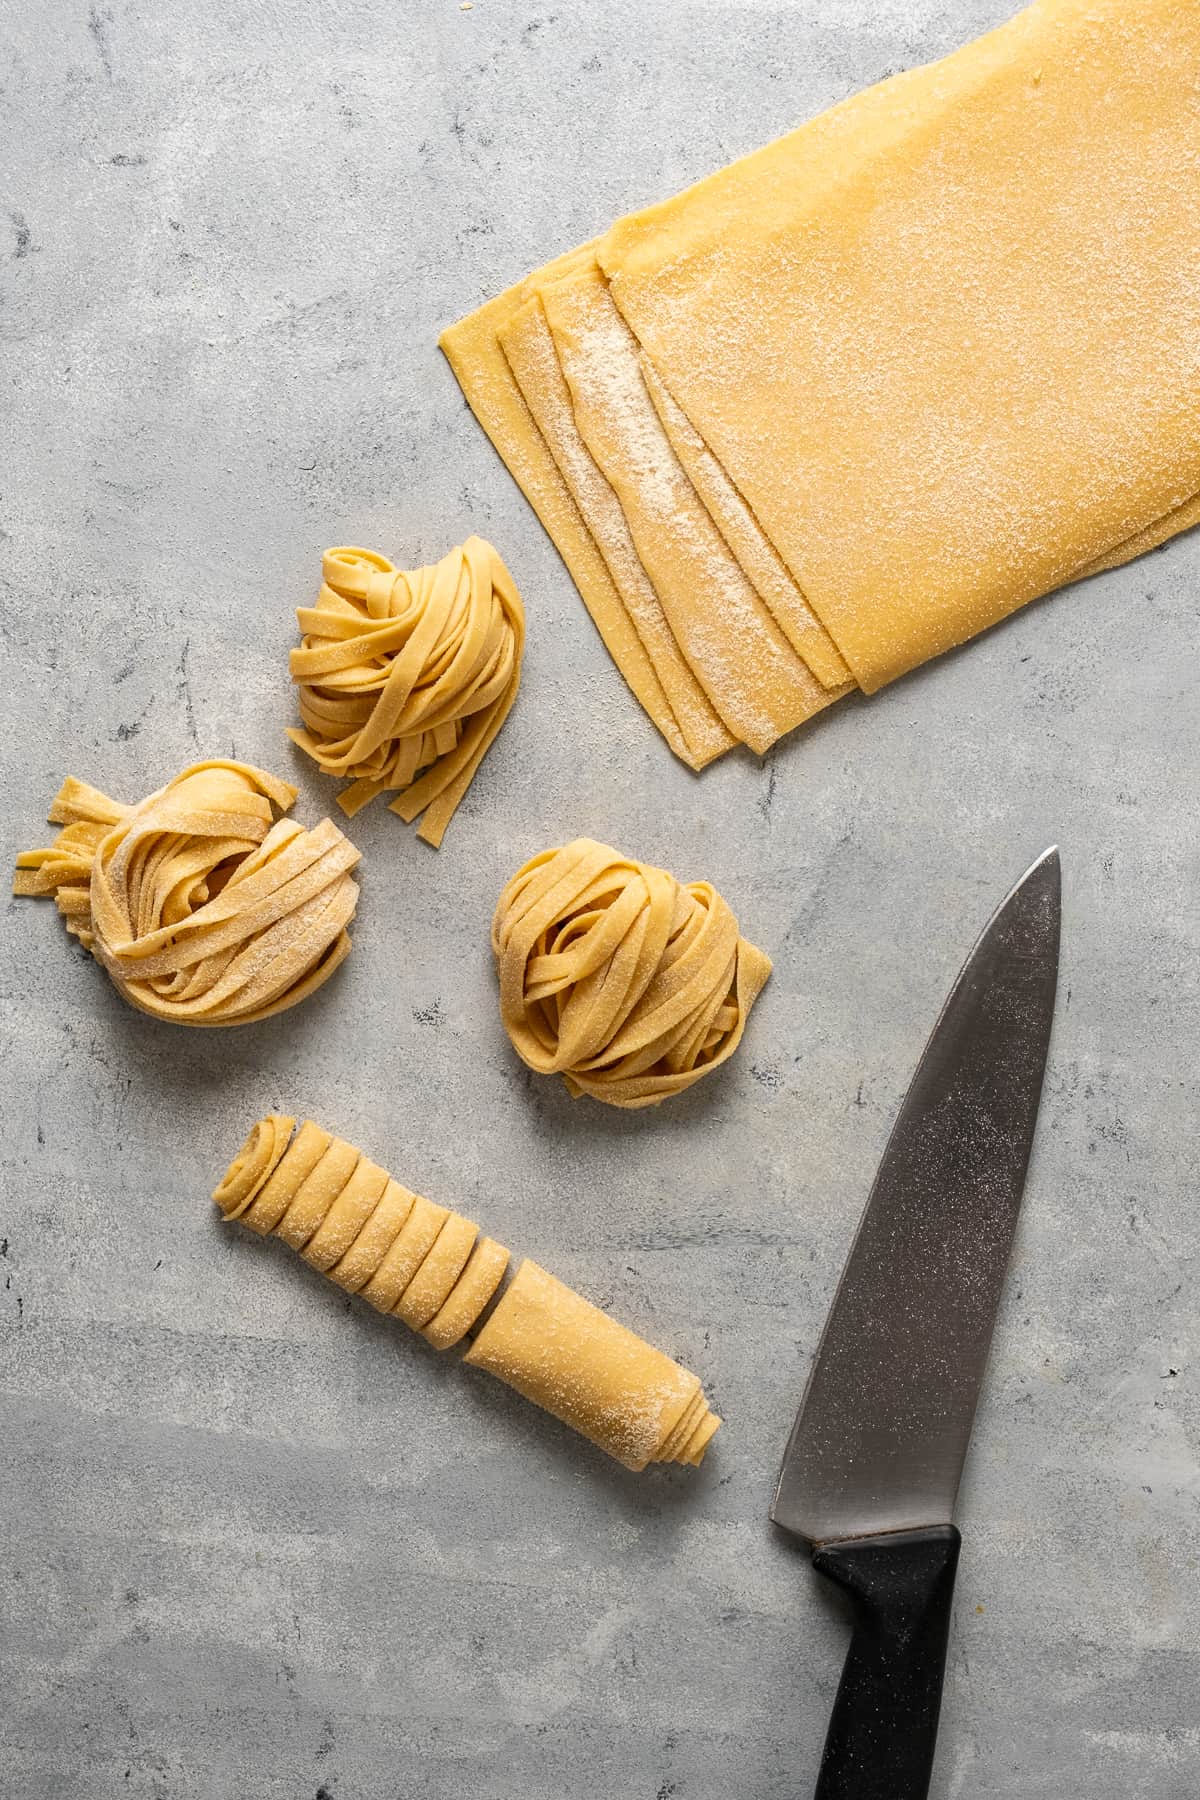 Pasta dough sheets piled, one sheet rolled and cut, three nests of dough strips and a knife on a grey background.